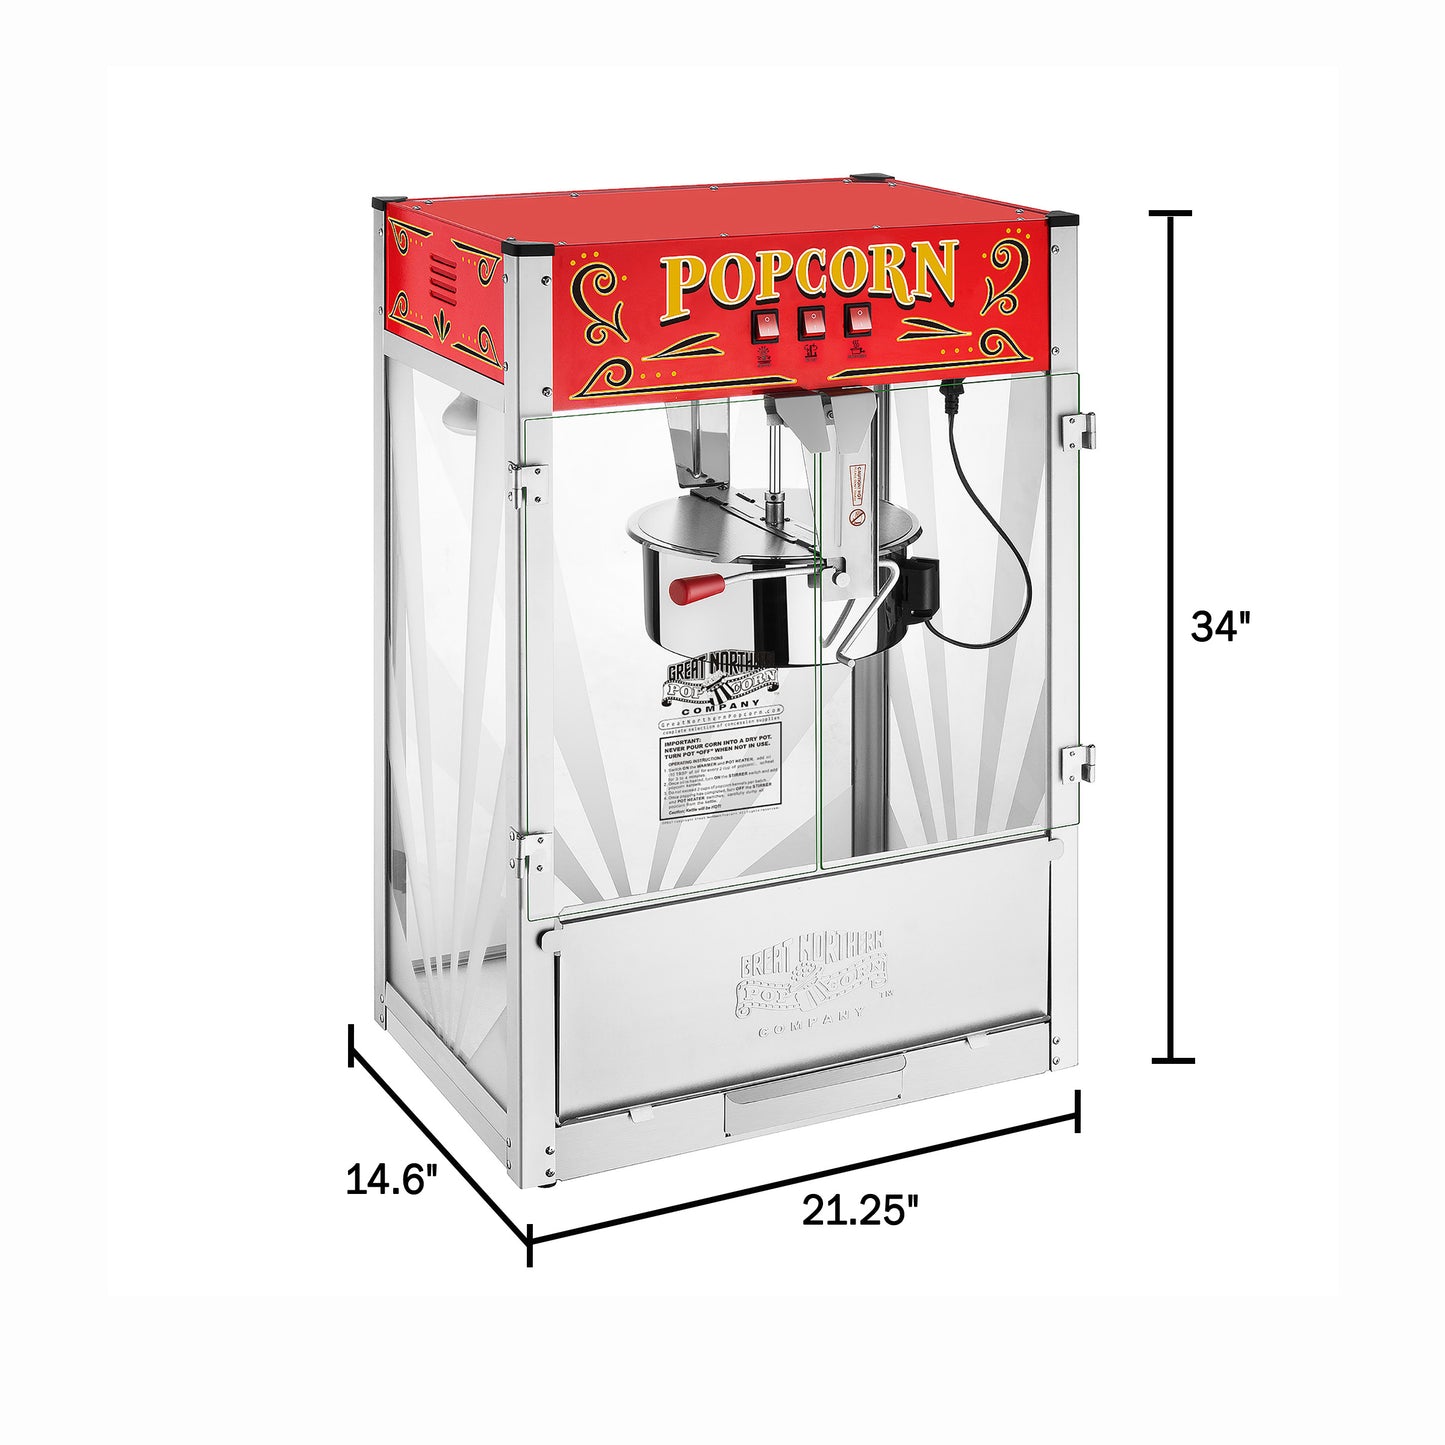 Midway Marvel Countertop Popcorn Machine with 16 Ounce Kettle - Red